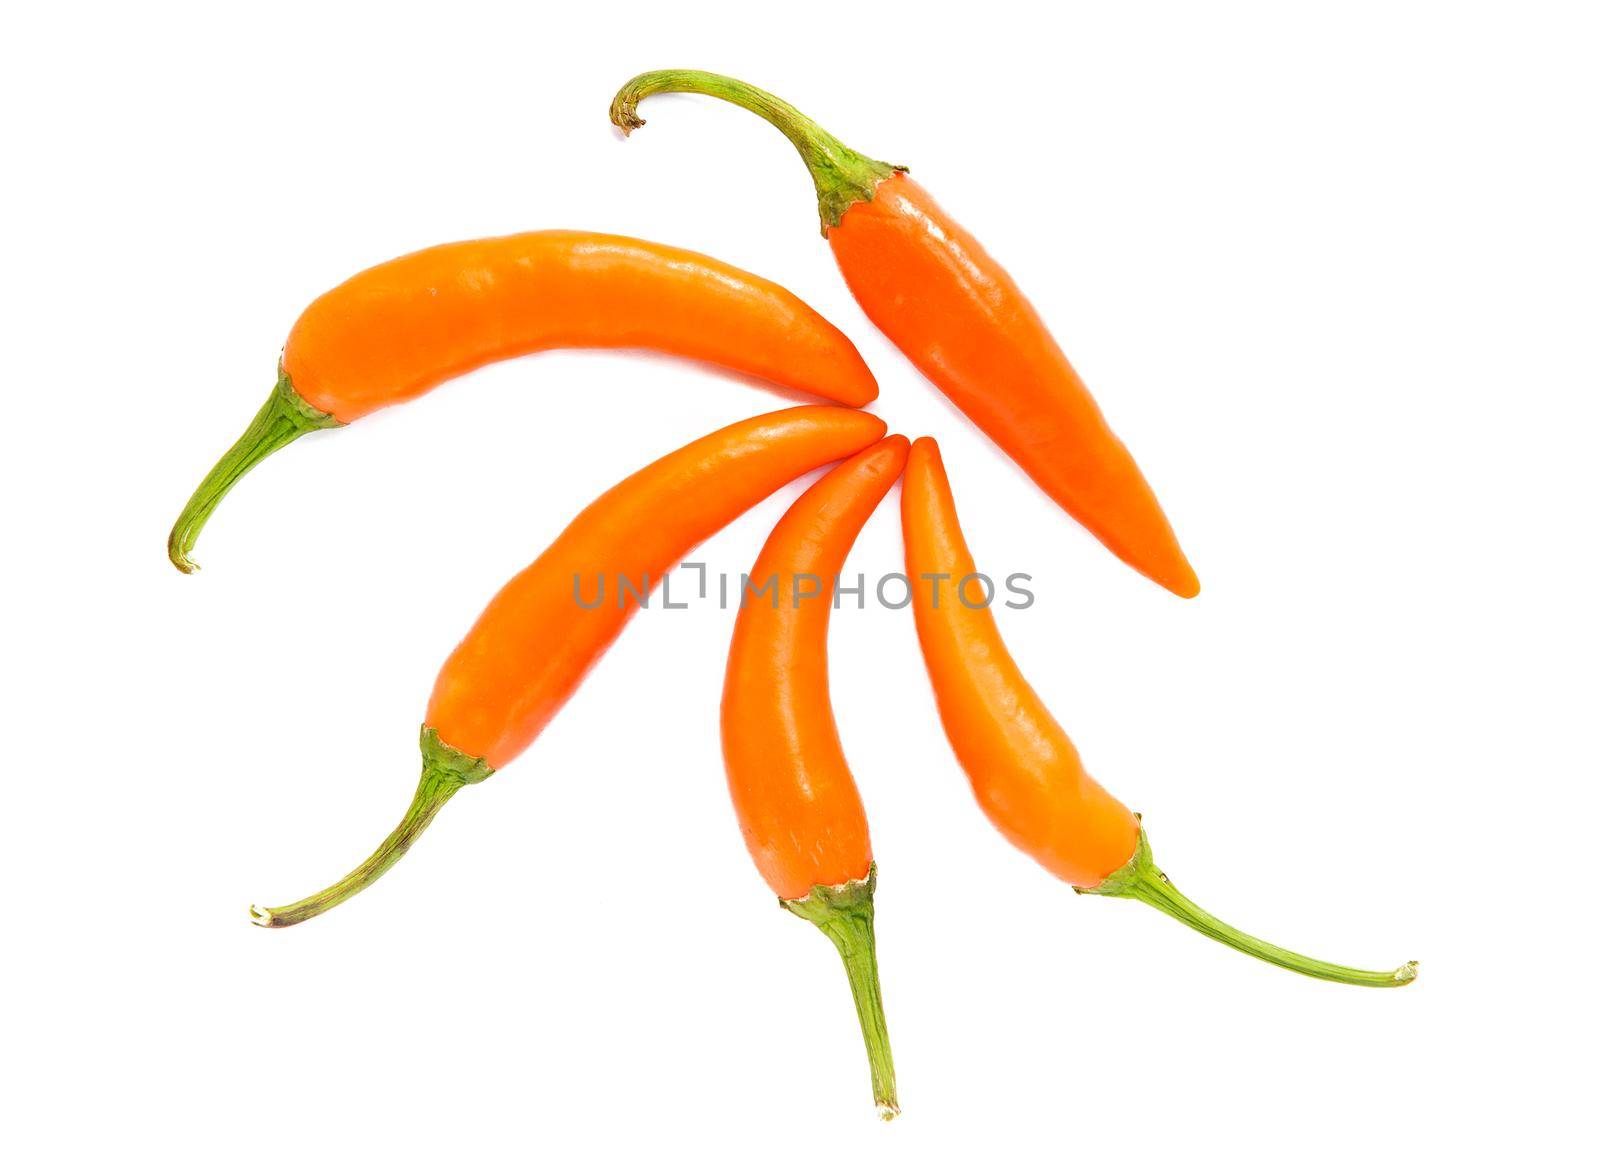 Yellow chili on white background by titipong